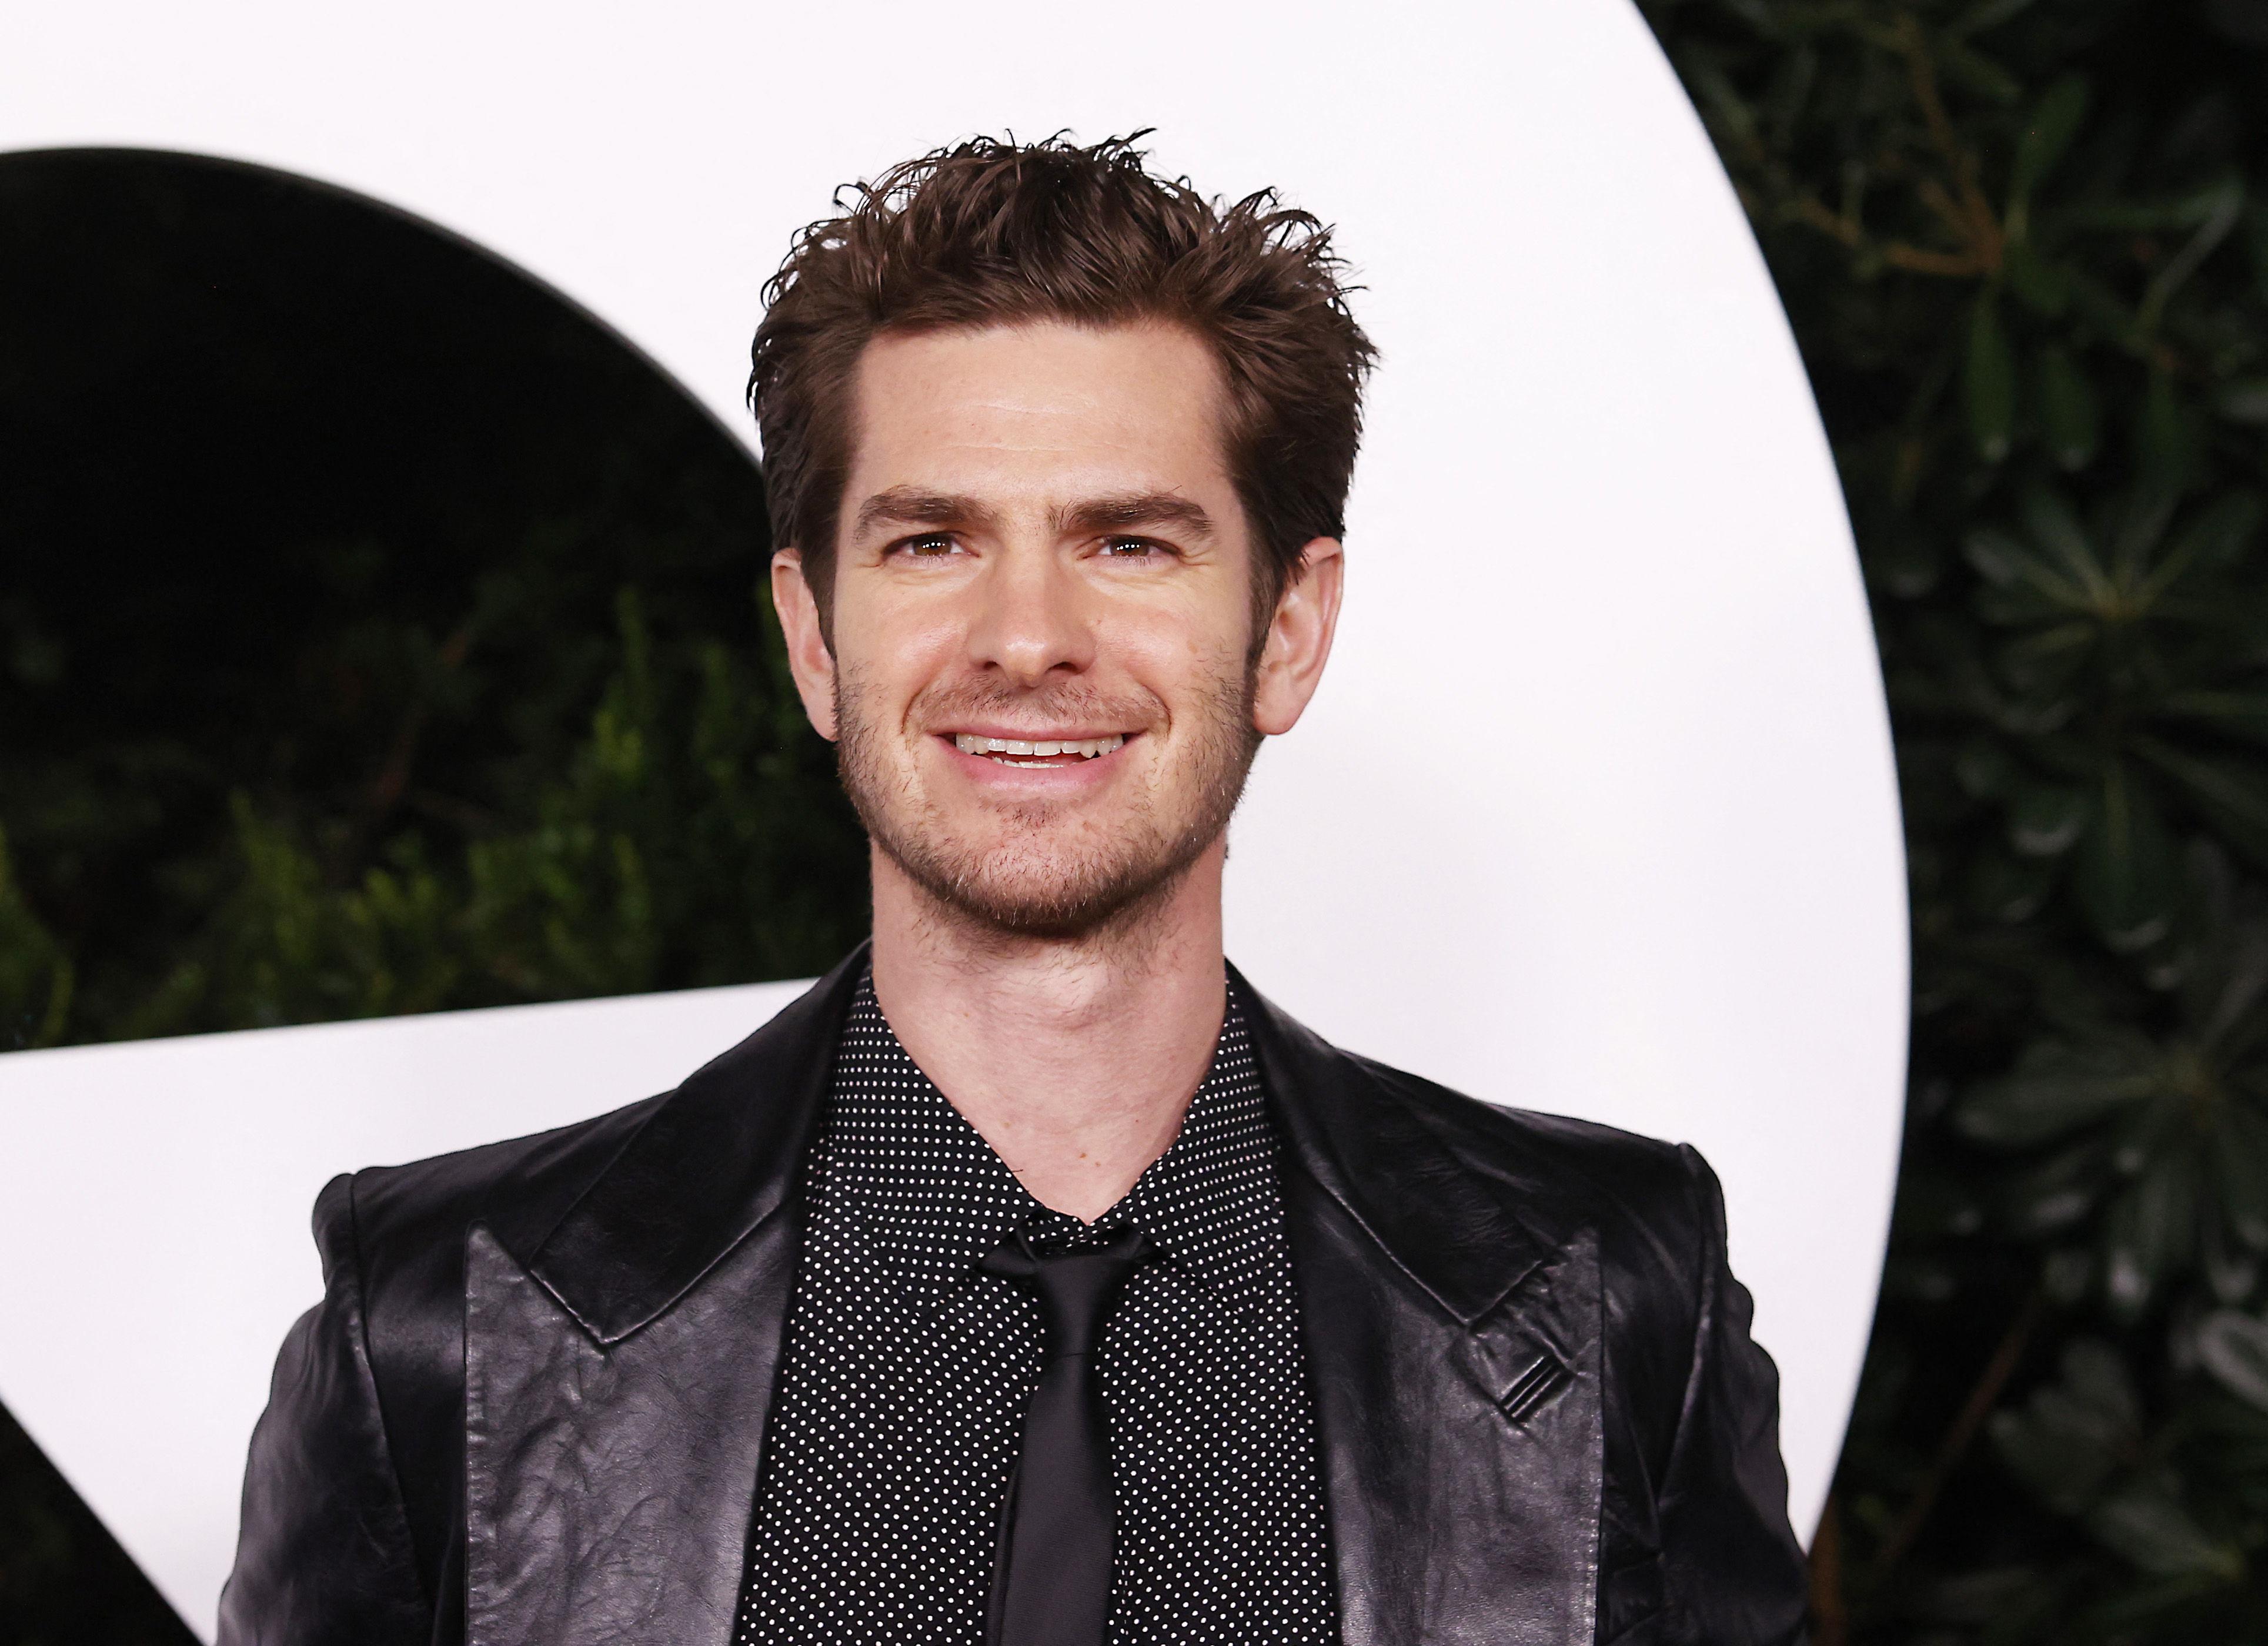 Andrew Garfield, who starred alongside Tobey Maguire in 'Spider-Man: No Way Home,' wears a black leather suit jacket over a black button-up shirt with small white polka dots and a black tie.